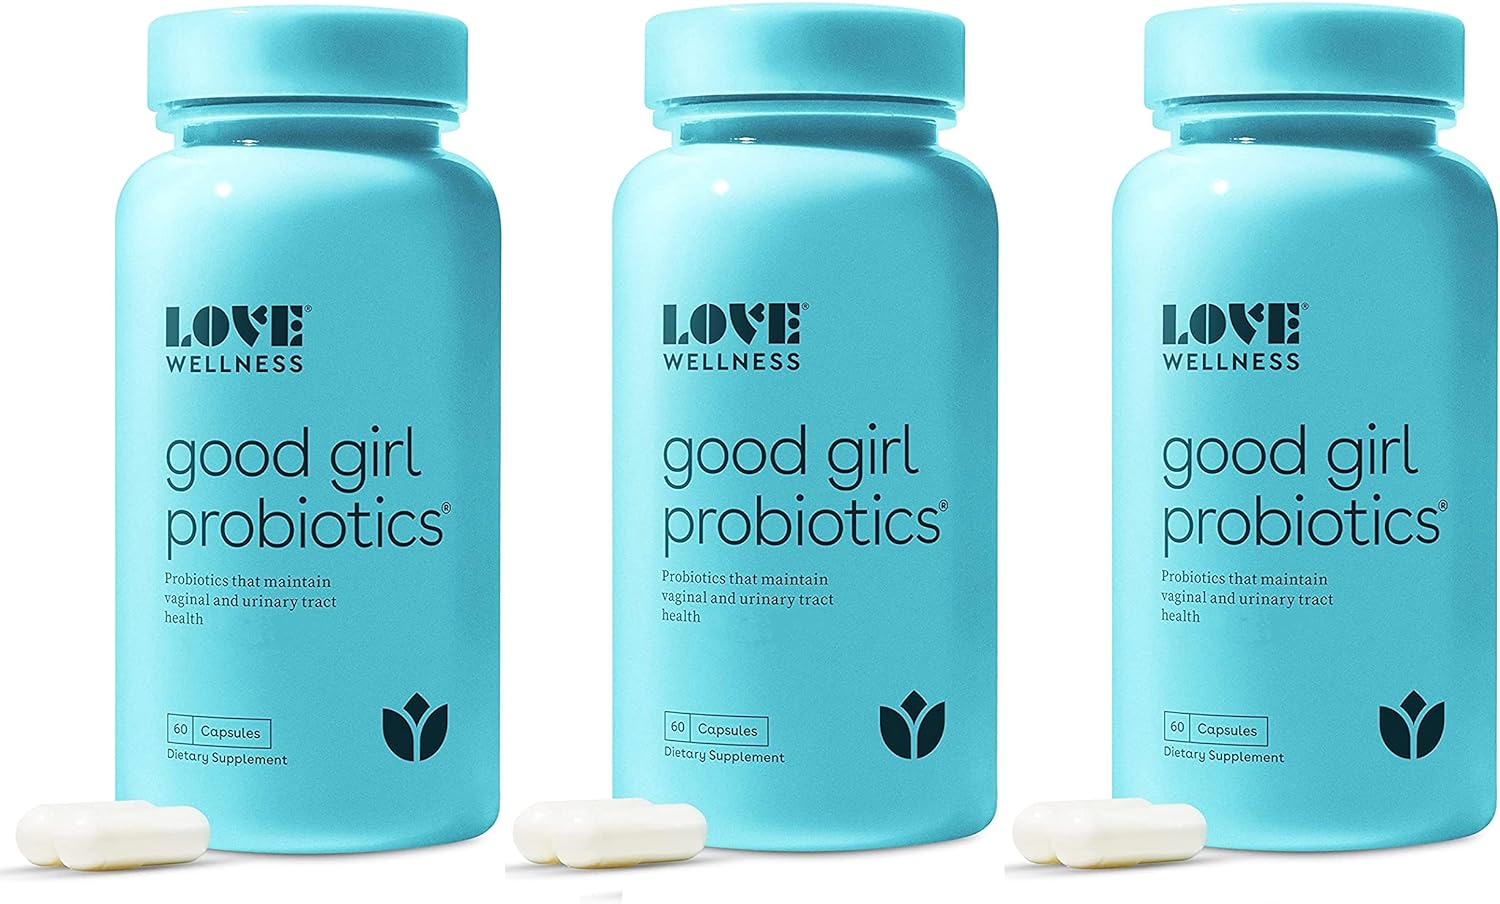 Wholesale prices with free shipping all over United States Love Wellness Vaginal Probiotics for Women, Good Girl Probiotics, 120 Count (Pack of 2) - pH Balance Probiotic for Feminine Health with Prebiotics - Urinary Tract Health for Vaginal Odor & Flora - Steven Deals